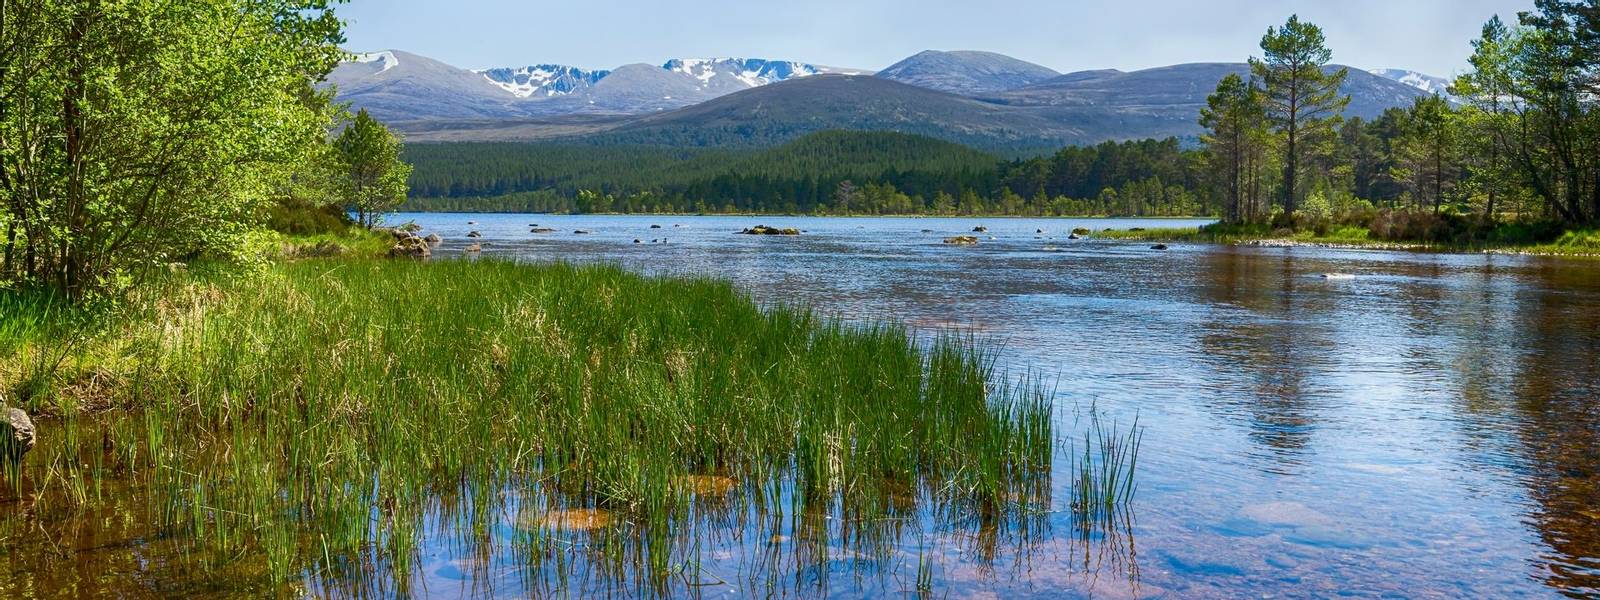 The clear waters of Loch Morlich, Scotland.  The Cairngorm mountains in the background.